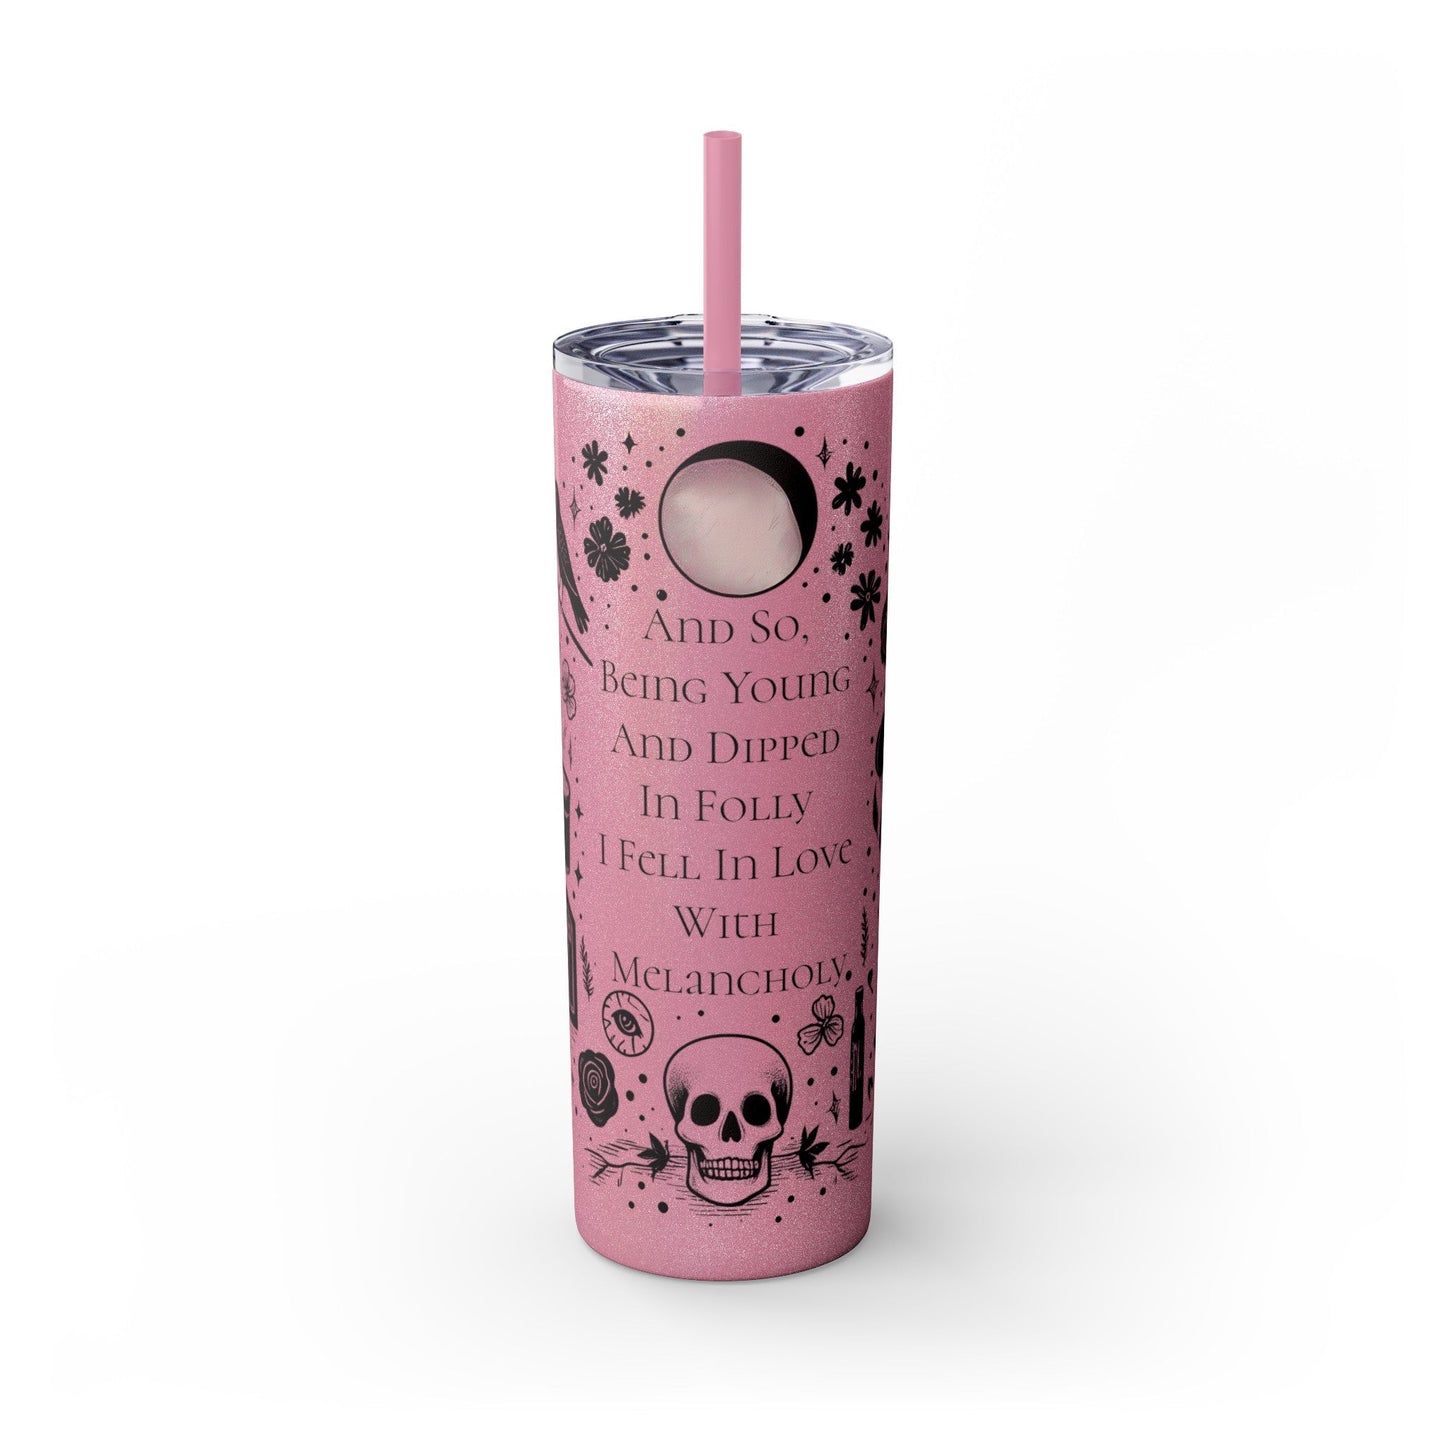 And So Being Young And Dipped In Folly I Fell In Love With Melancholy Skinny Tumbler with StrawMugVTZdesignsGlossyGlitter Magic Pink20oz20 ozBottles & Tumblerscup